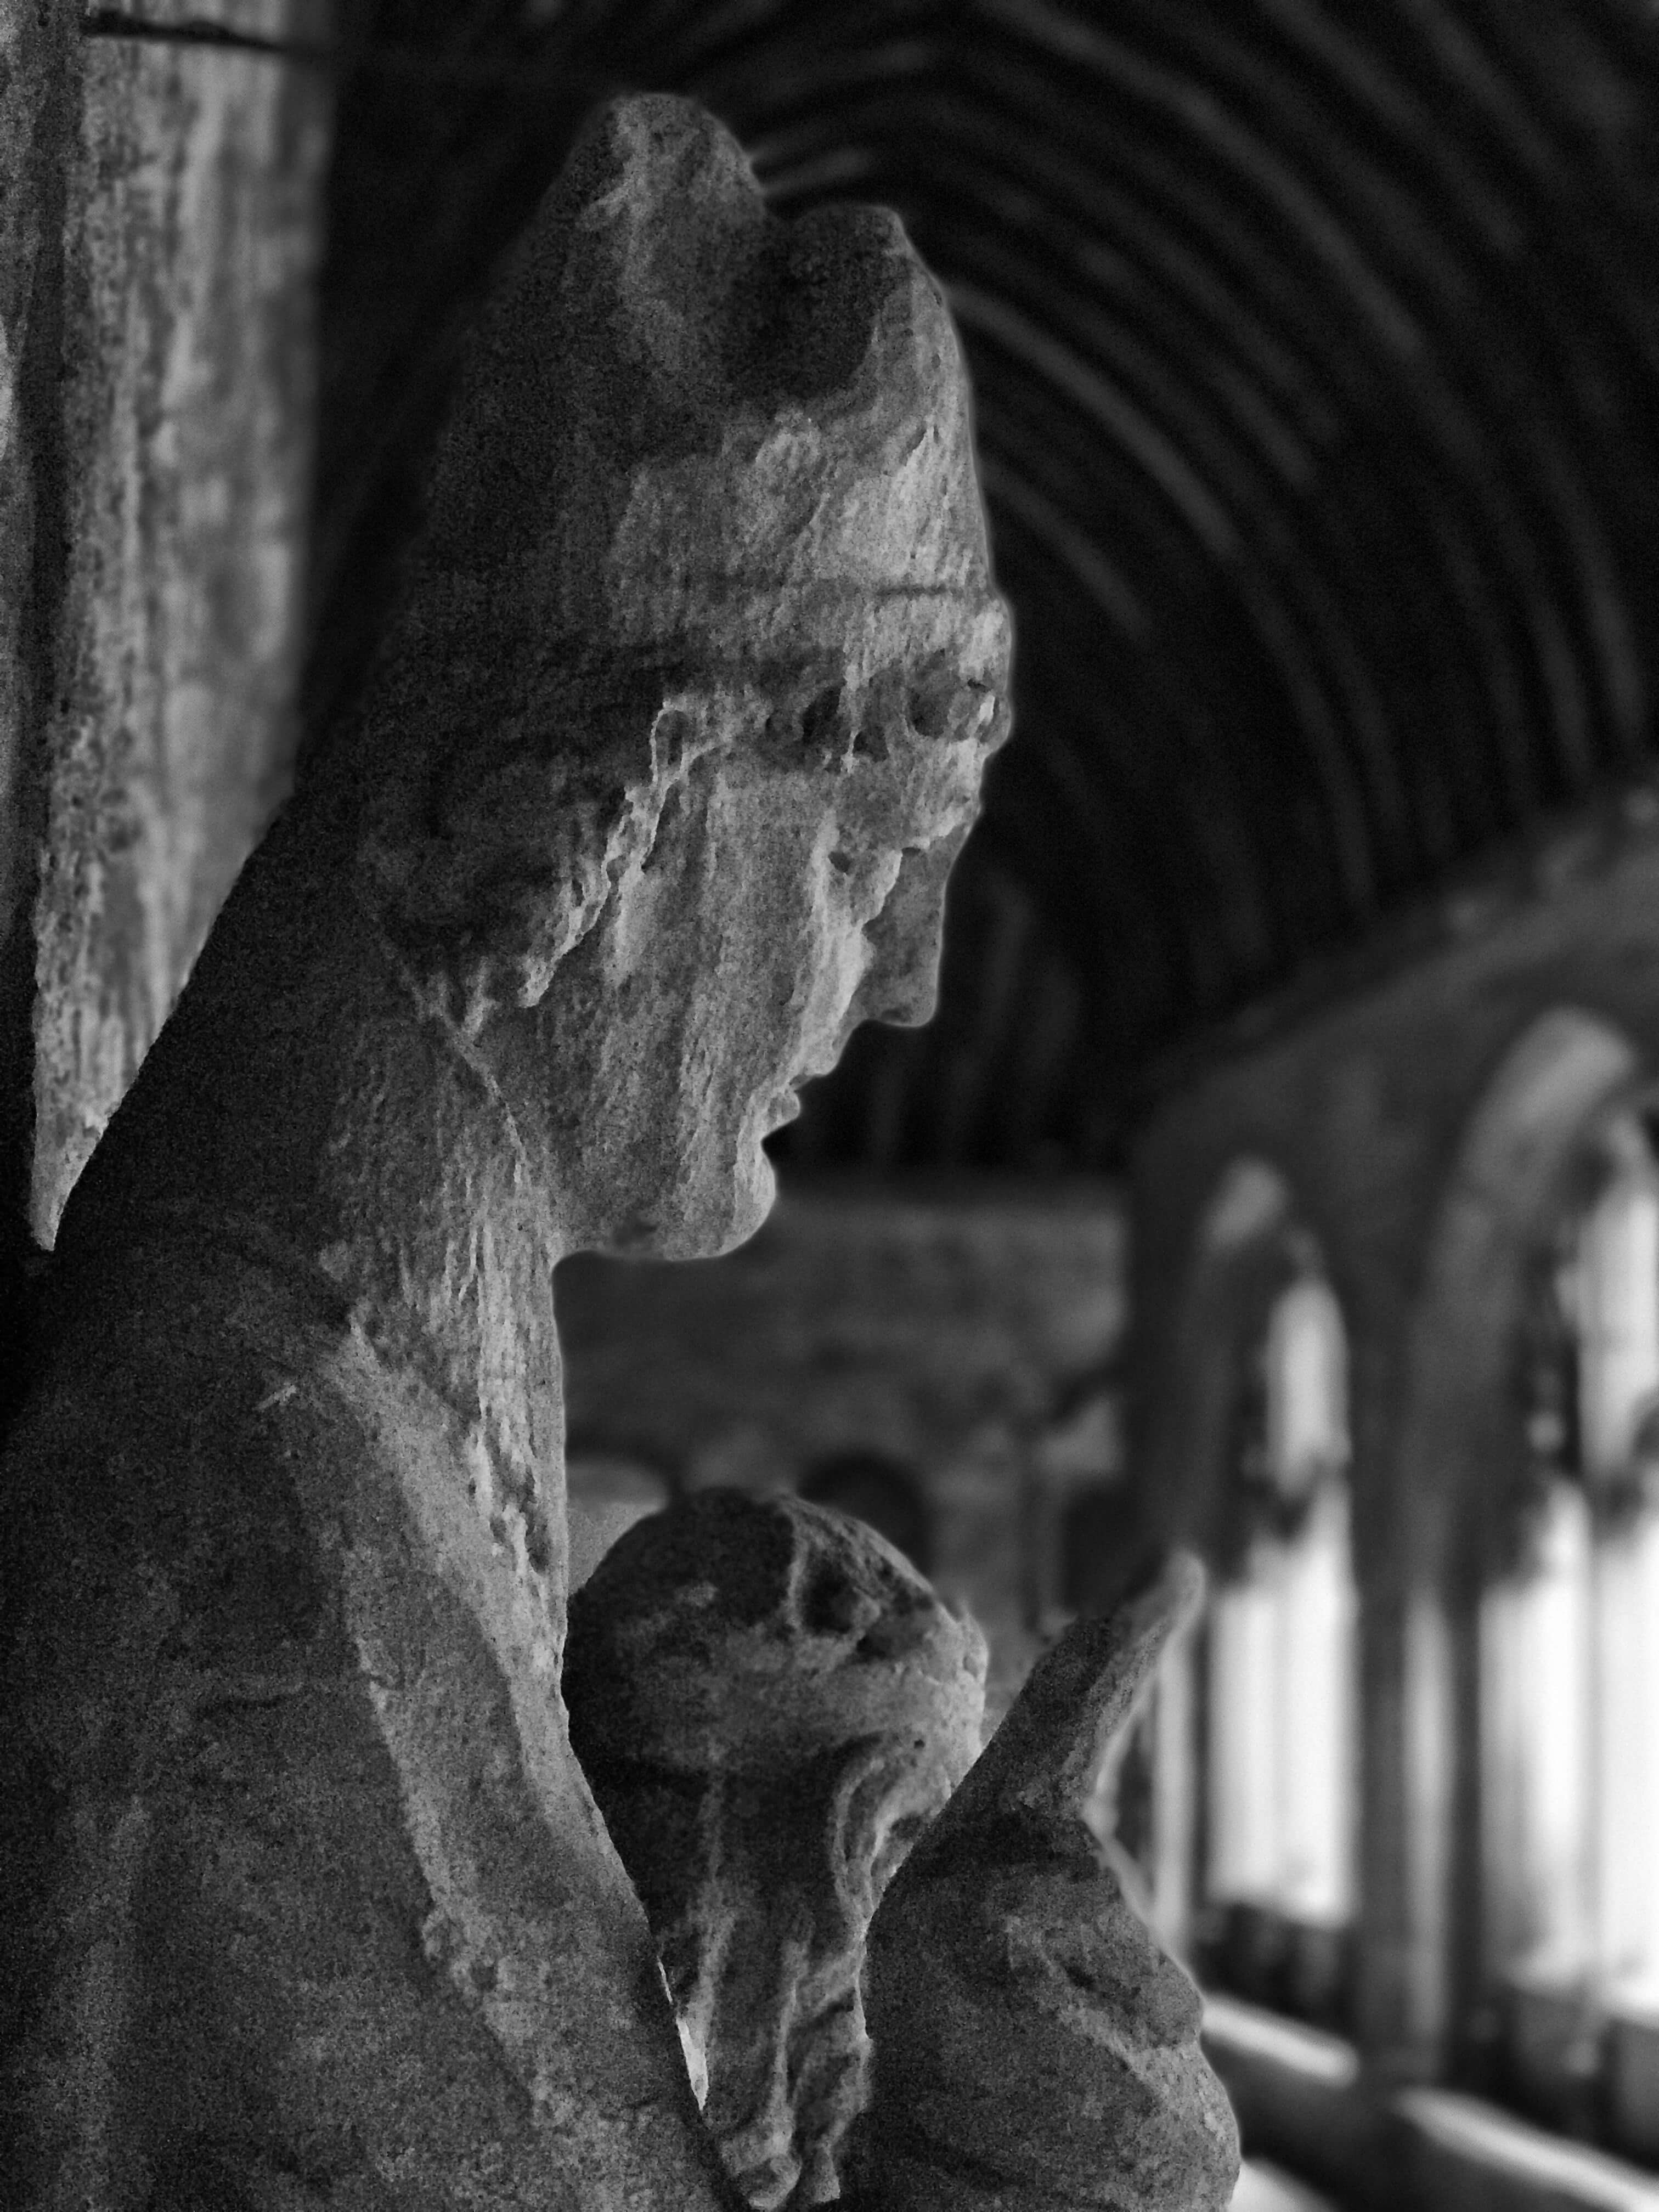 St. Cuthbert's statue in New College Cloisters, Oxford